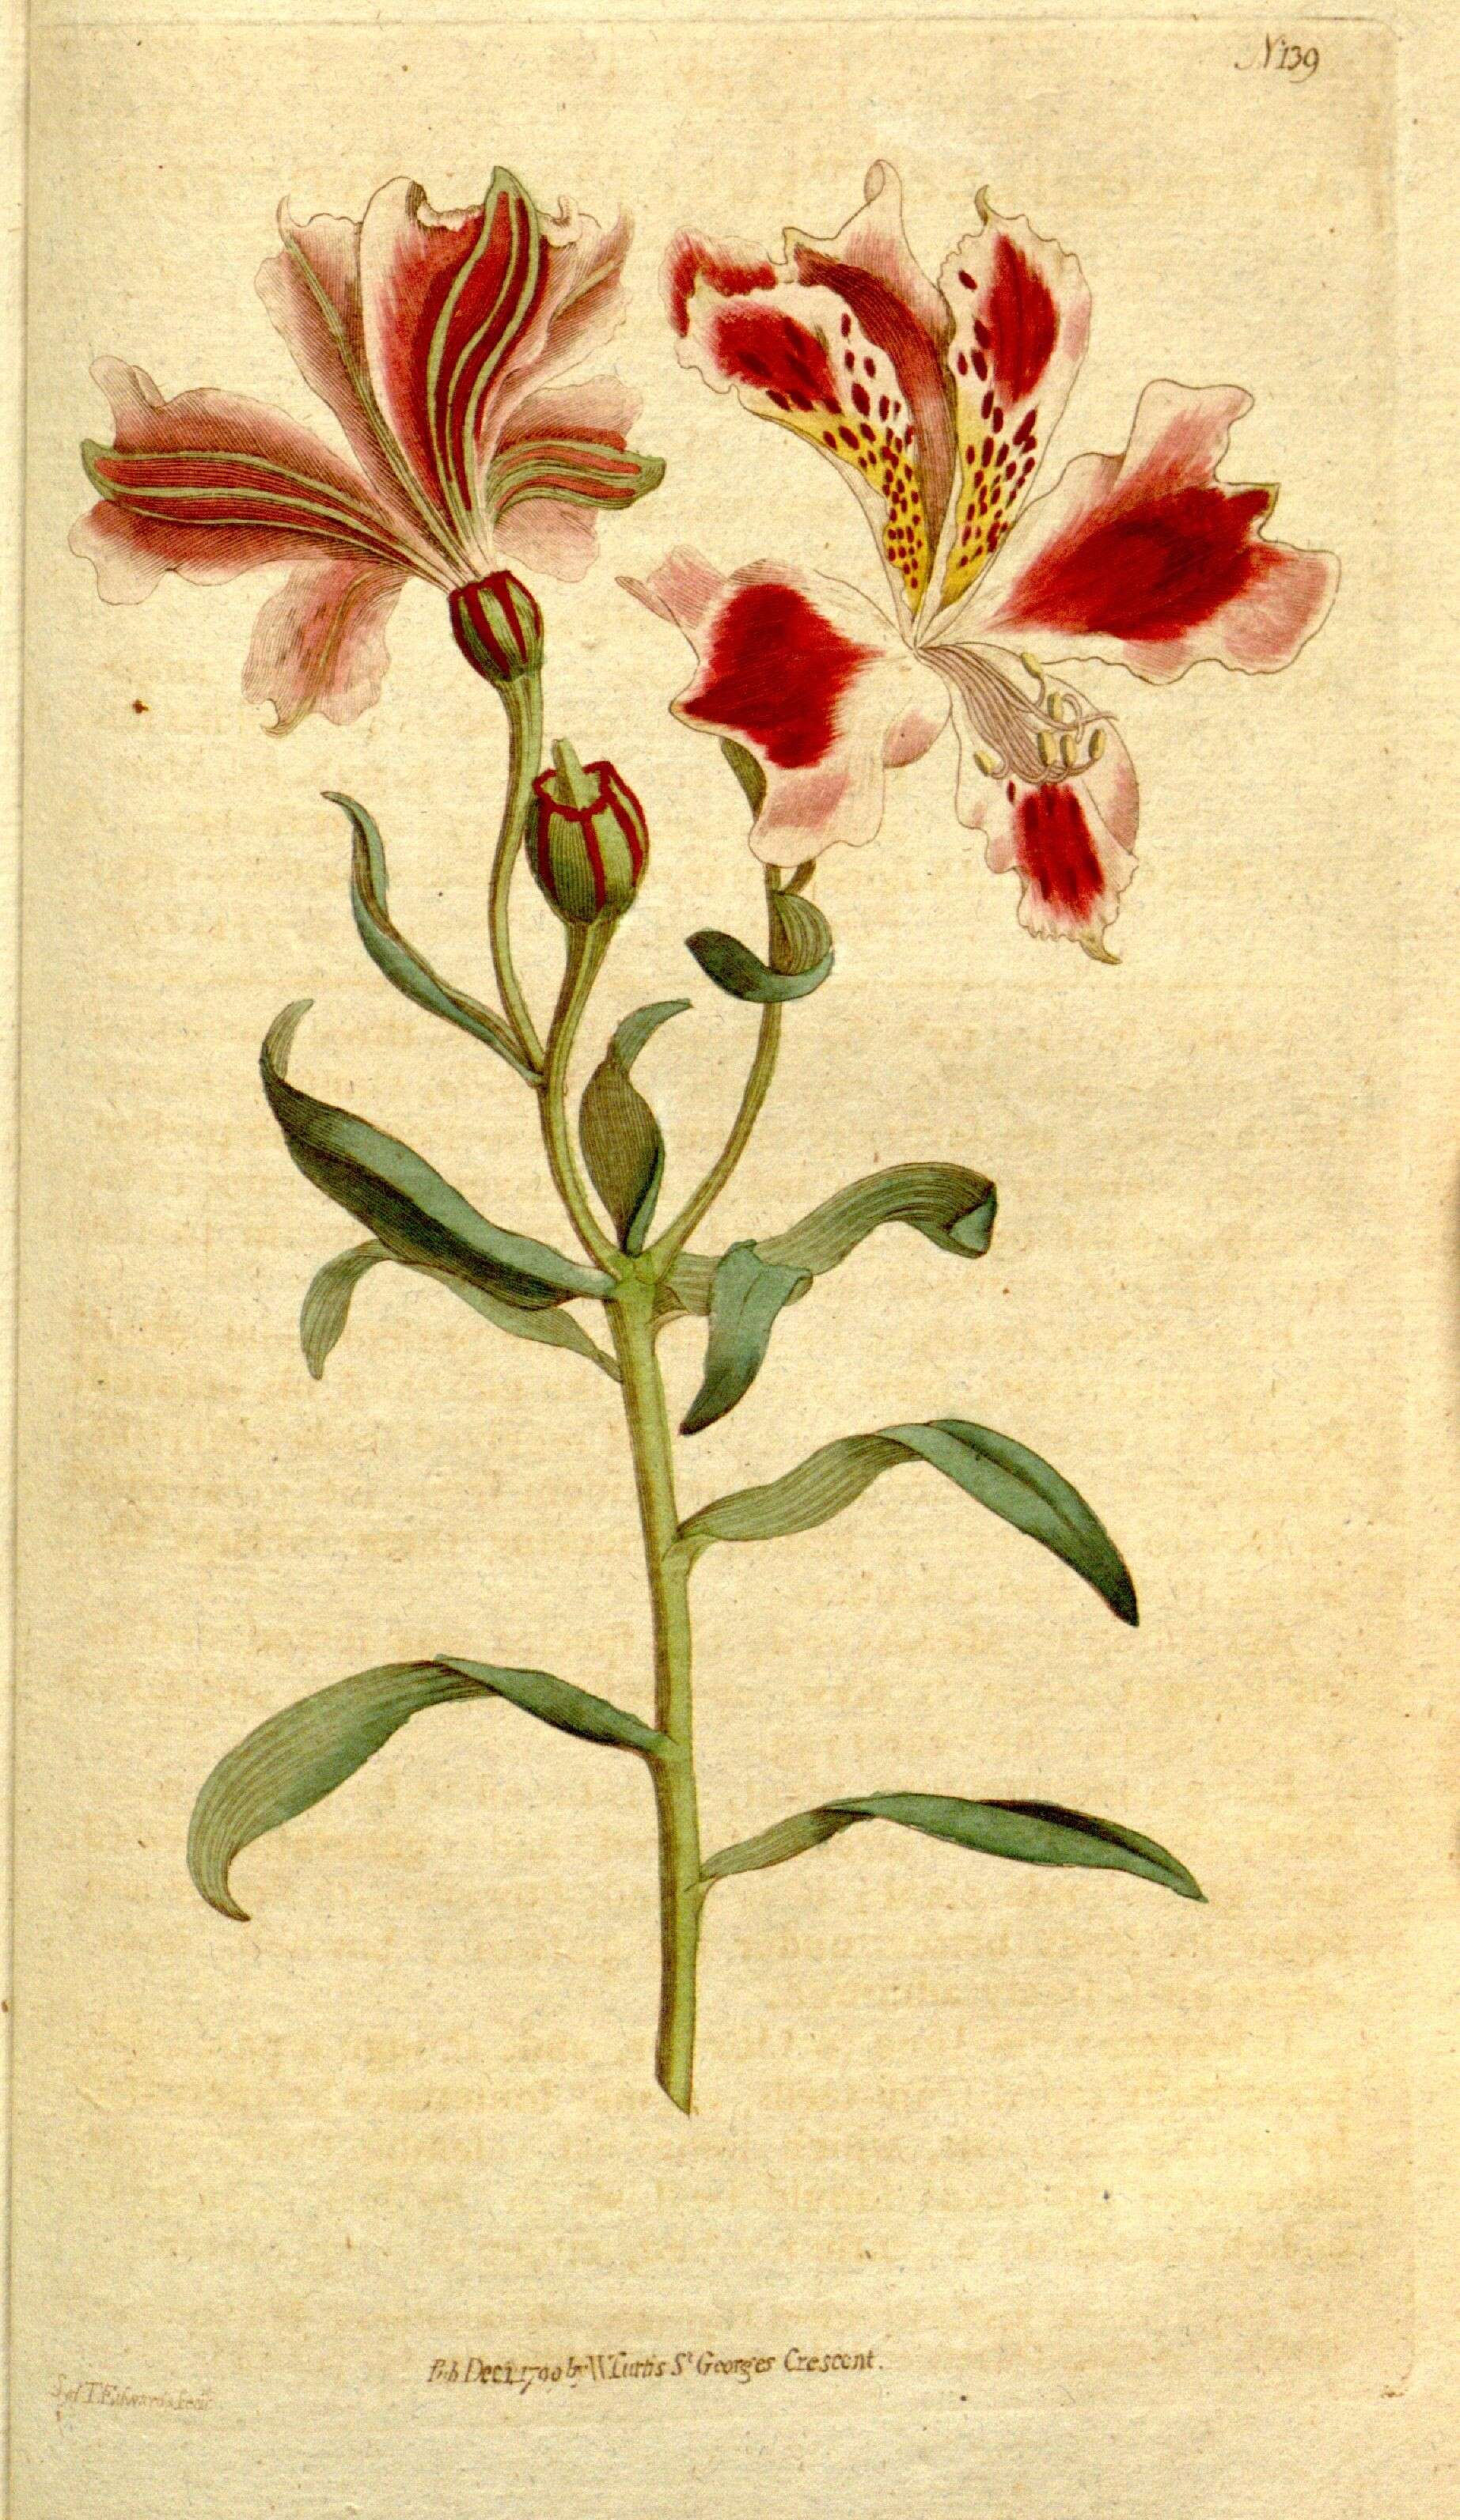 Image of lily of the Incas